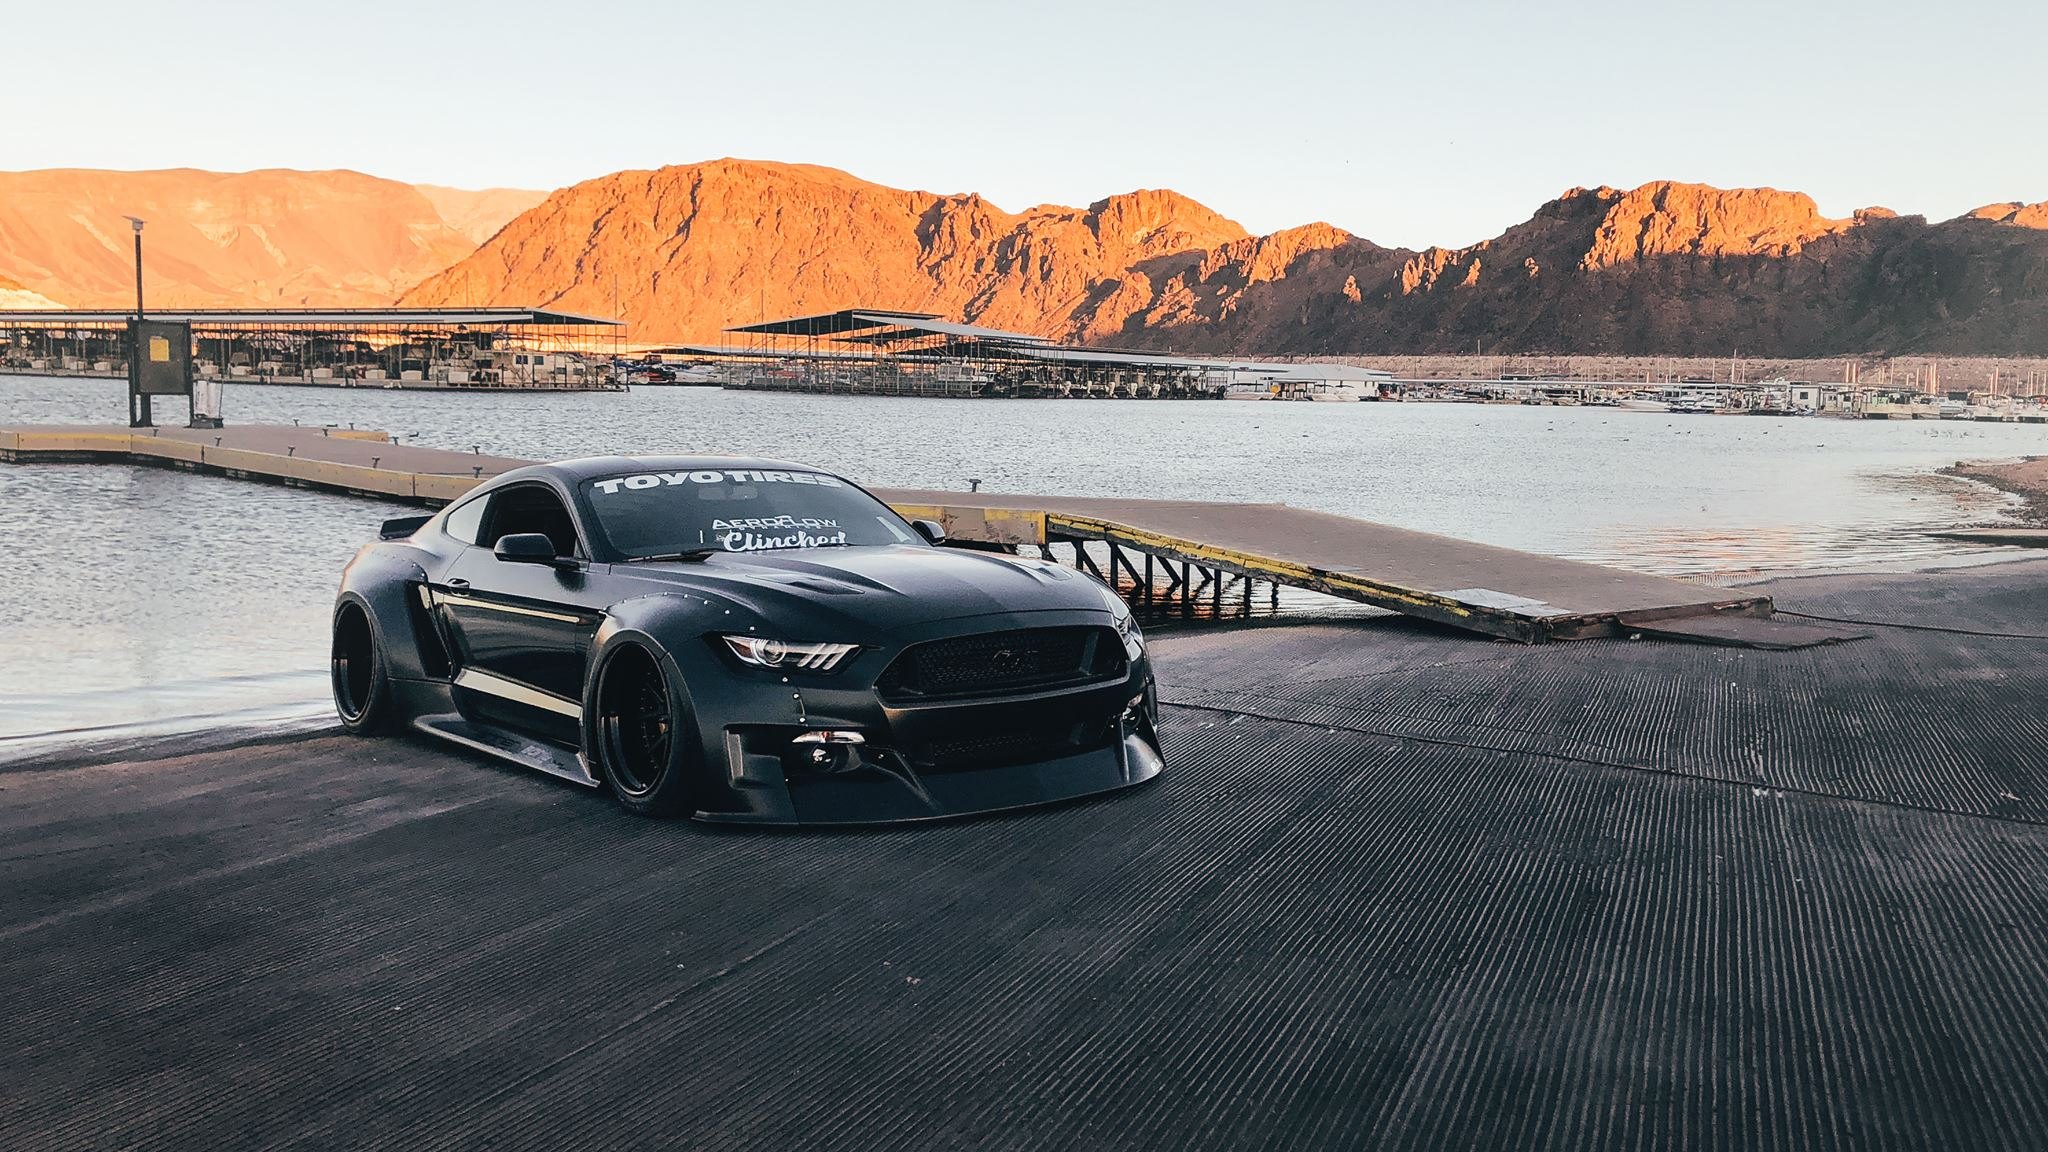 Black Ford Mustang with Custom Fender Flares - Photo by Clinched